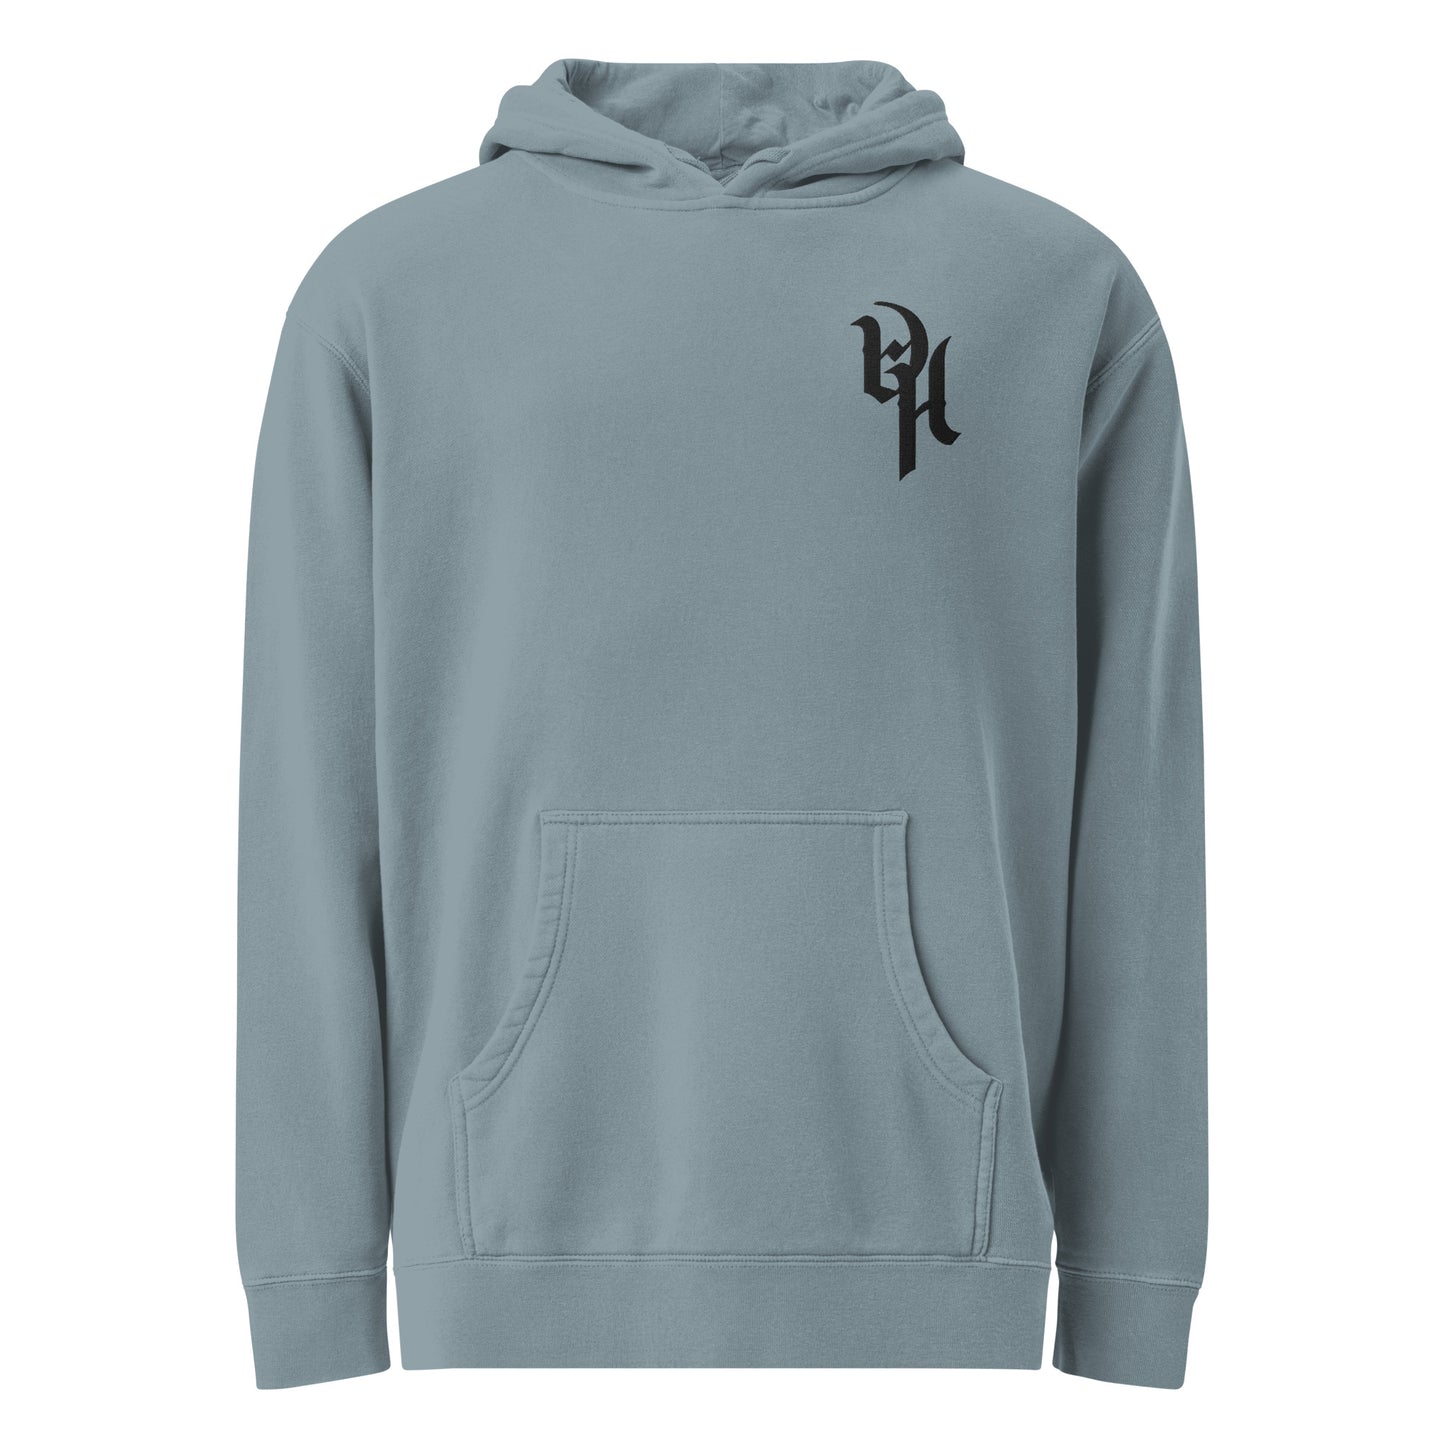 DH Pigment-Dyed hoodie